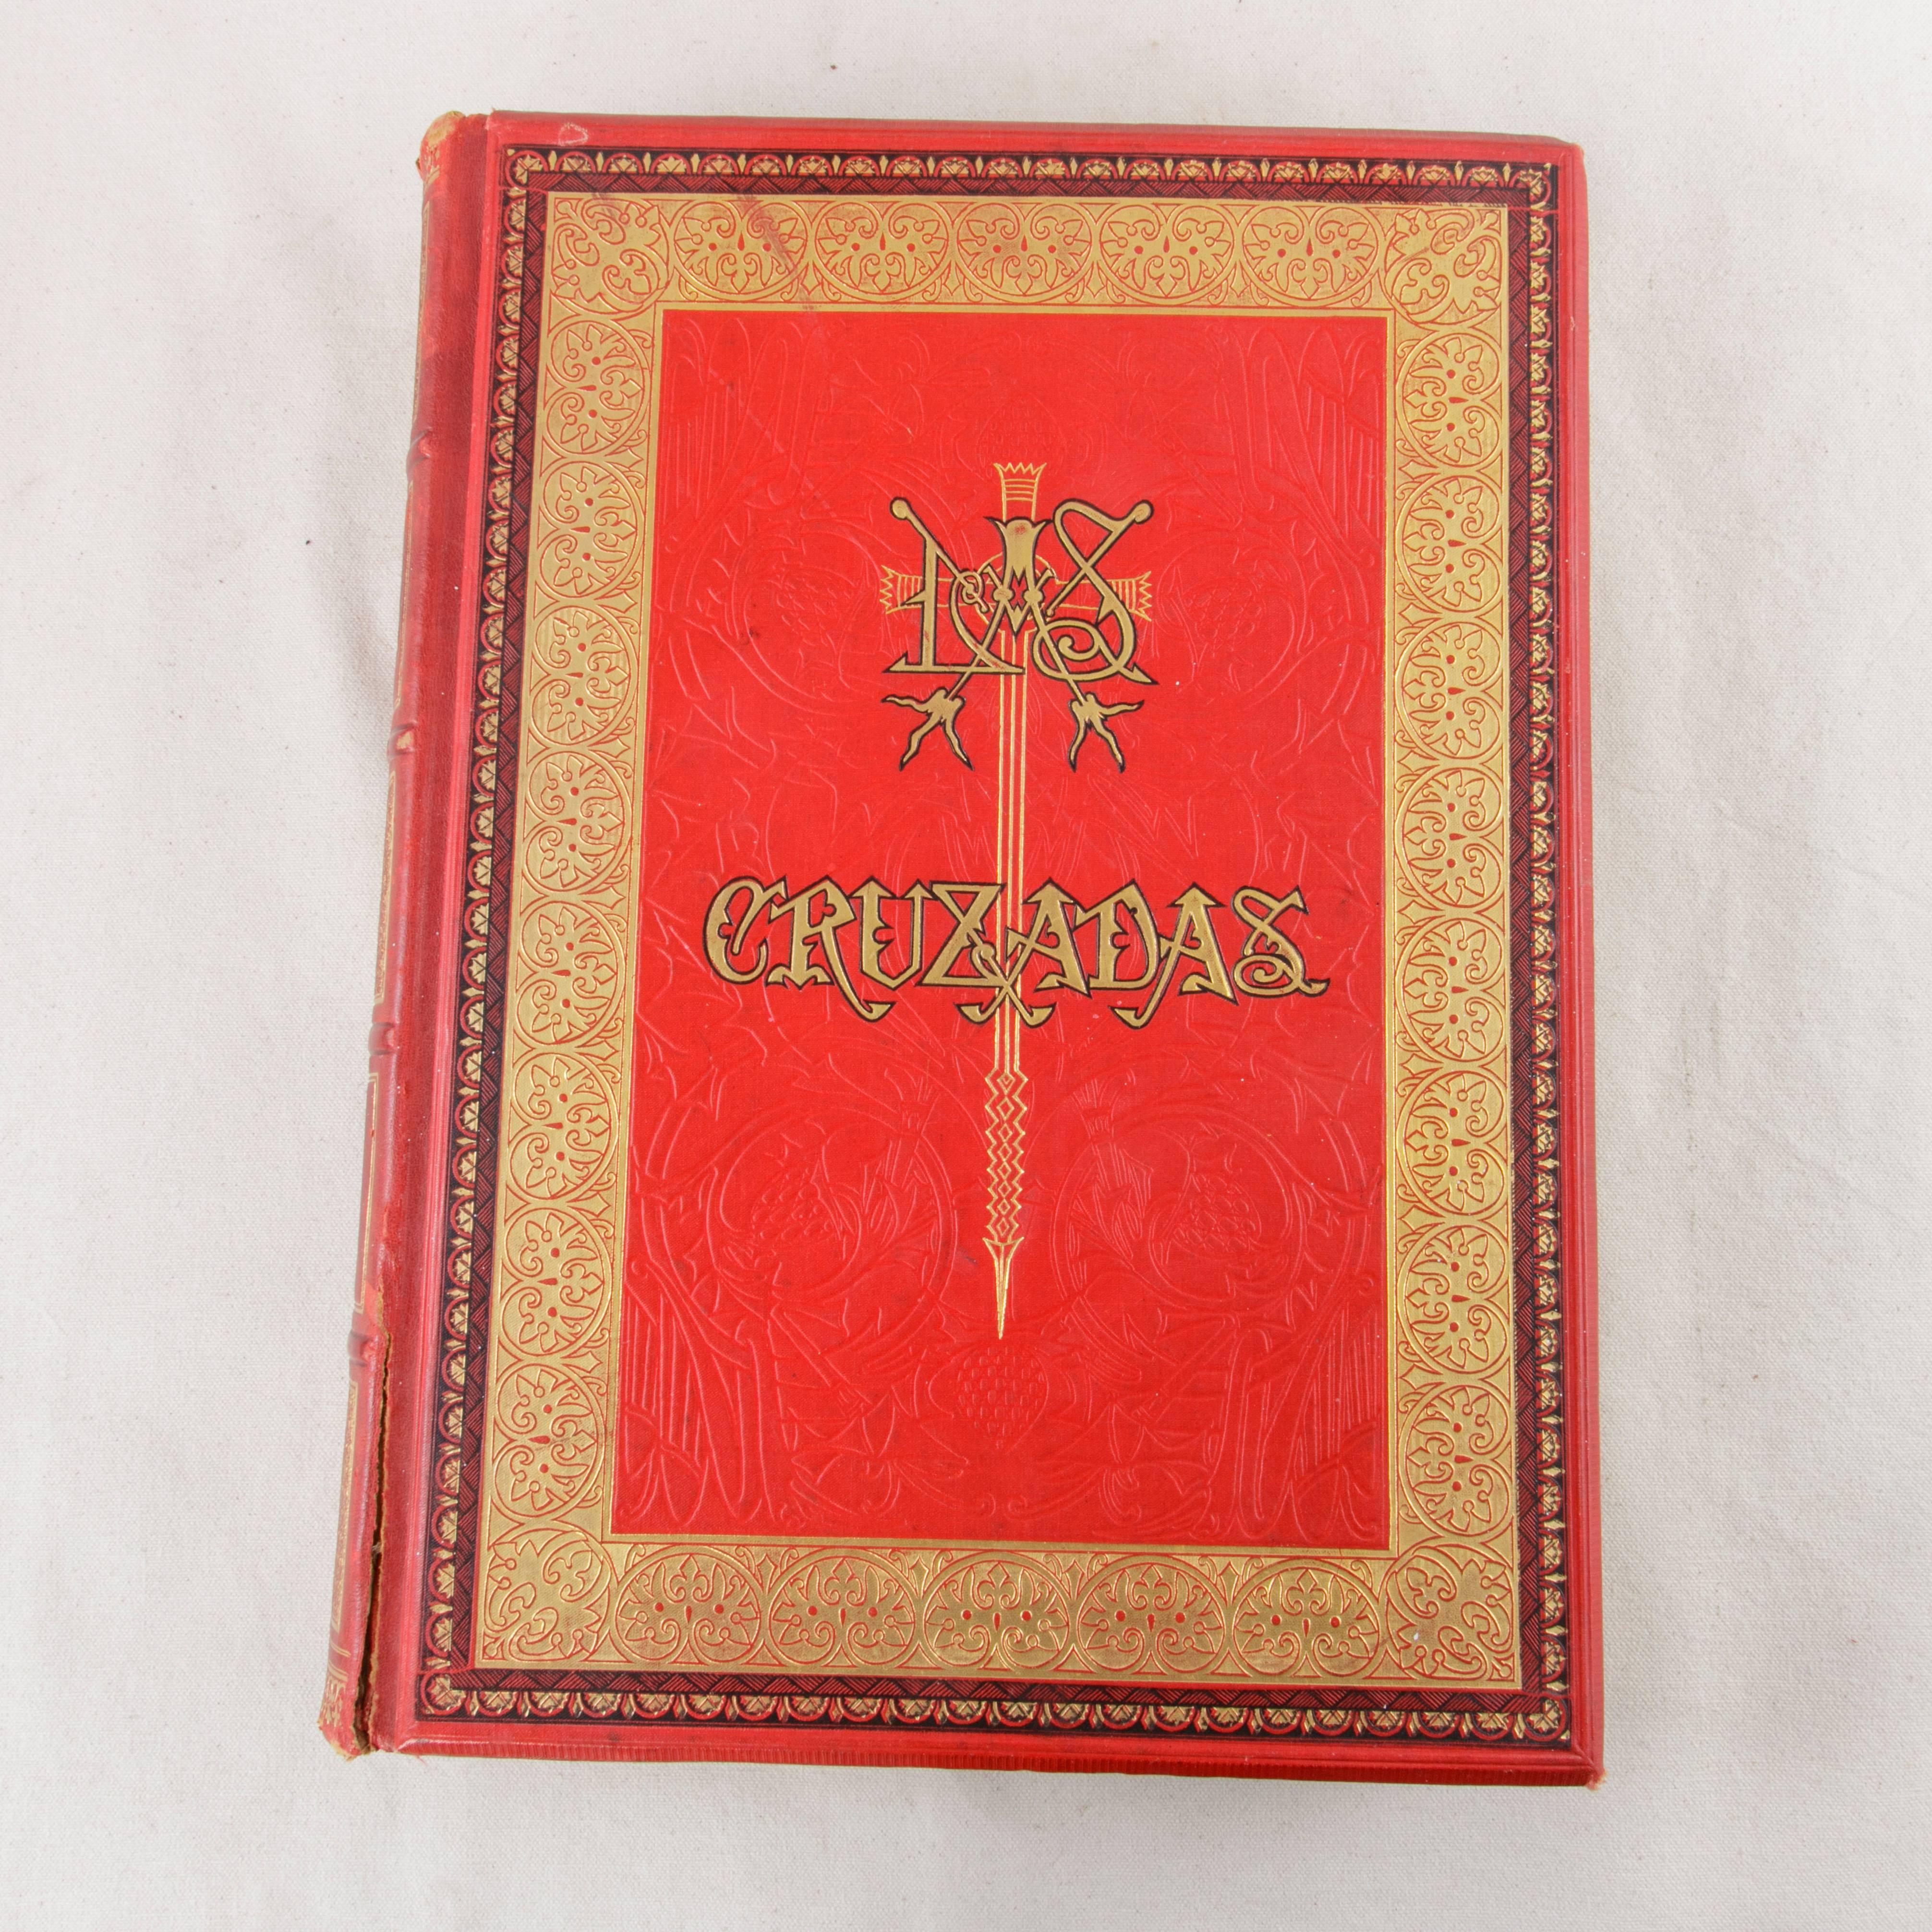 Late 19th Century Two Volume Set Large 19th Century Spanish Red and Gold Tooled Books the Crusades